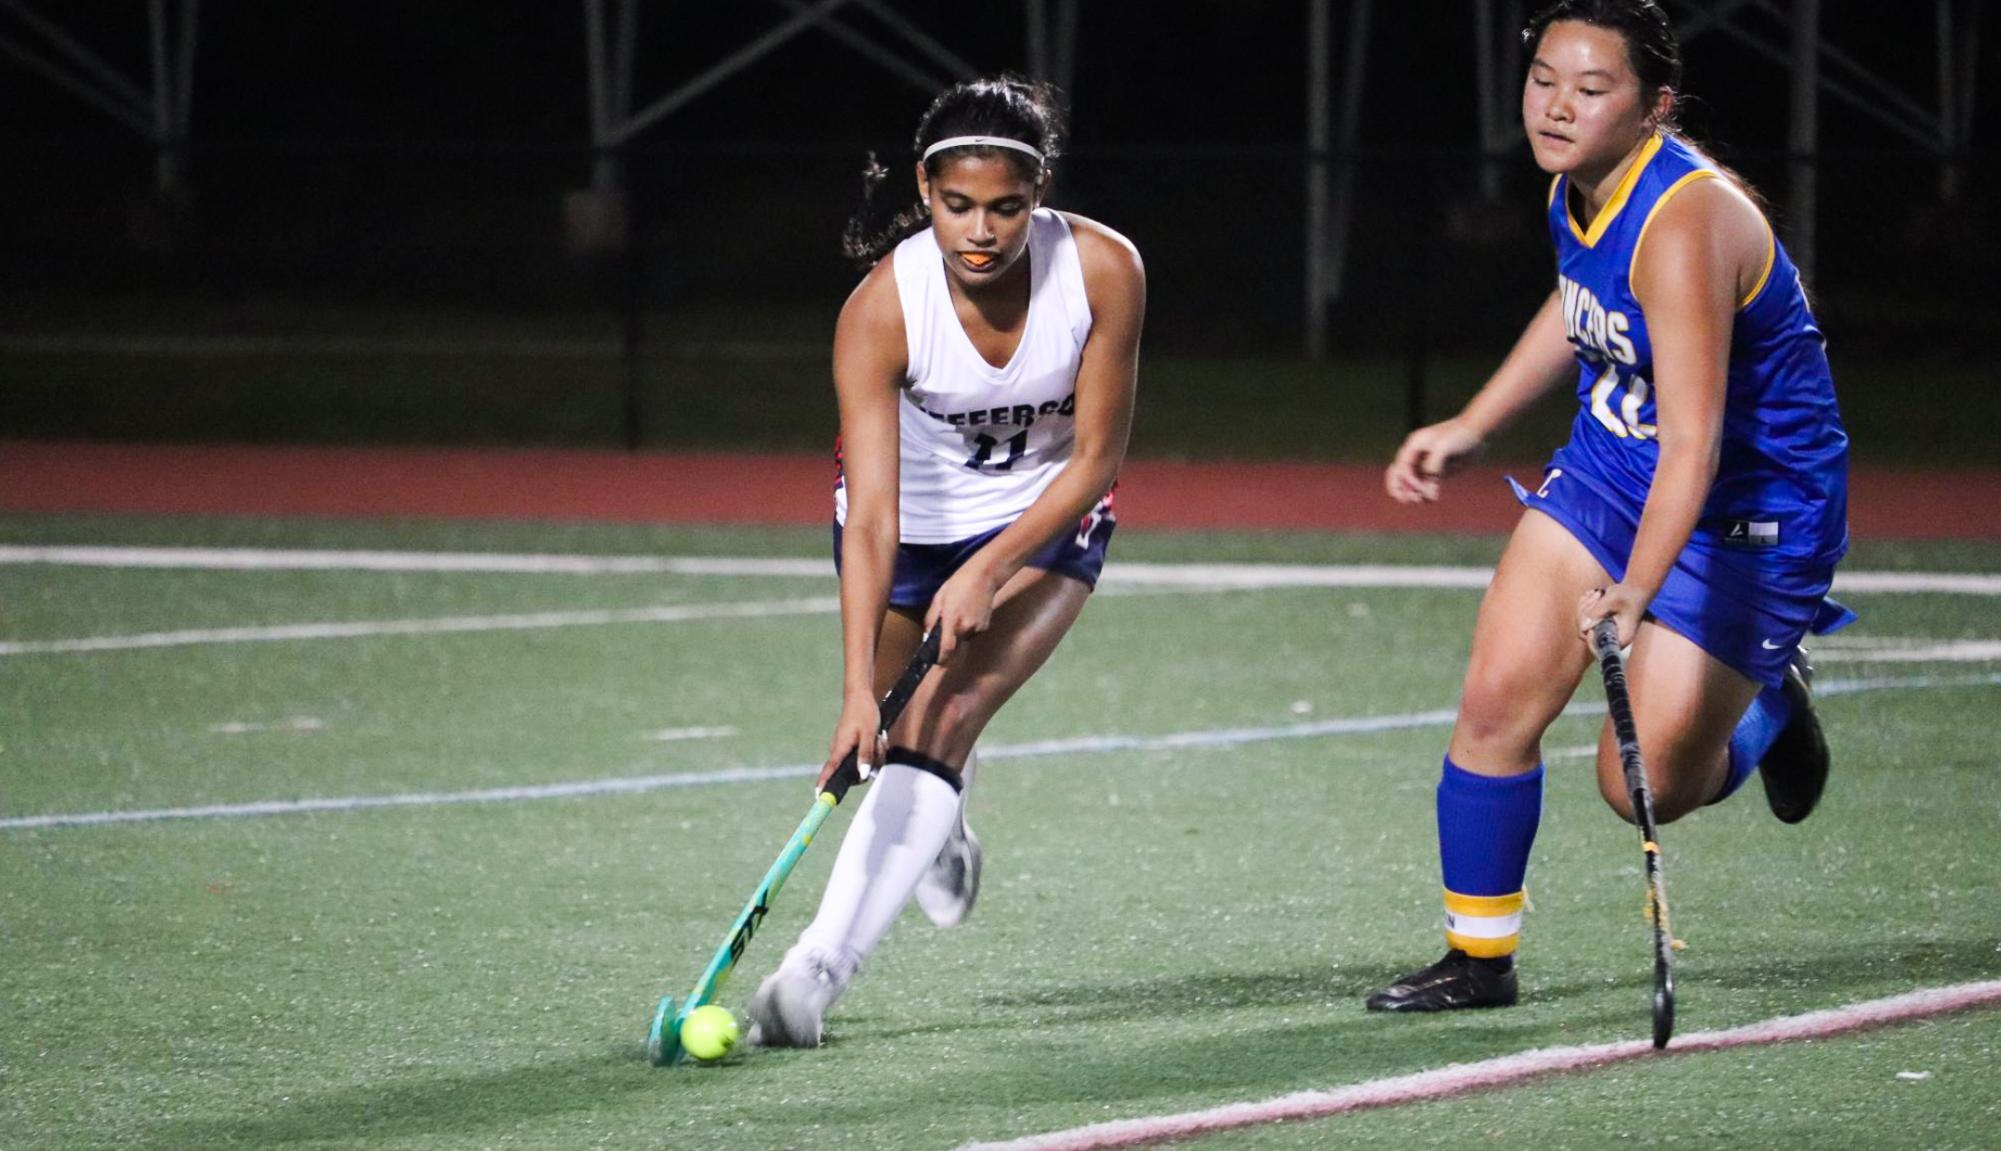 Jefferson’s varsity field hockey celebrates their senior night against Lewis with family and friends. “The seniors are a very close knit community,” sophomore Amanda Van Buskirk said. “Just to see them all play in that game, it was a great experience.”